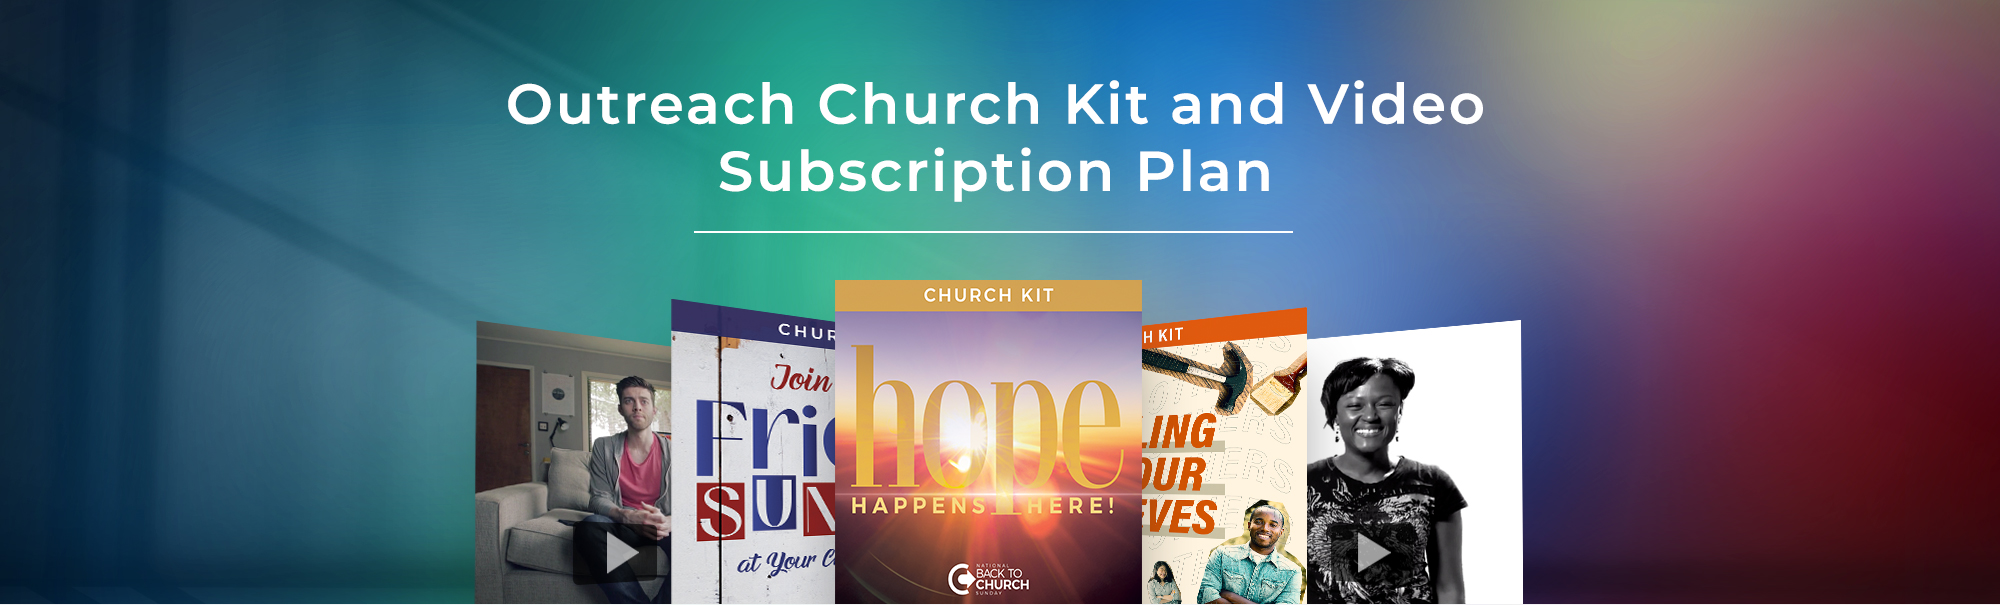 Sermon Series Church Kit and Video Subscription Plan from Outreach.com